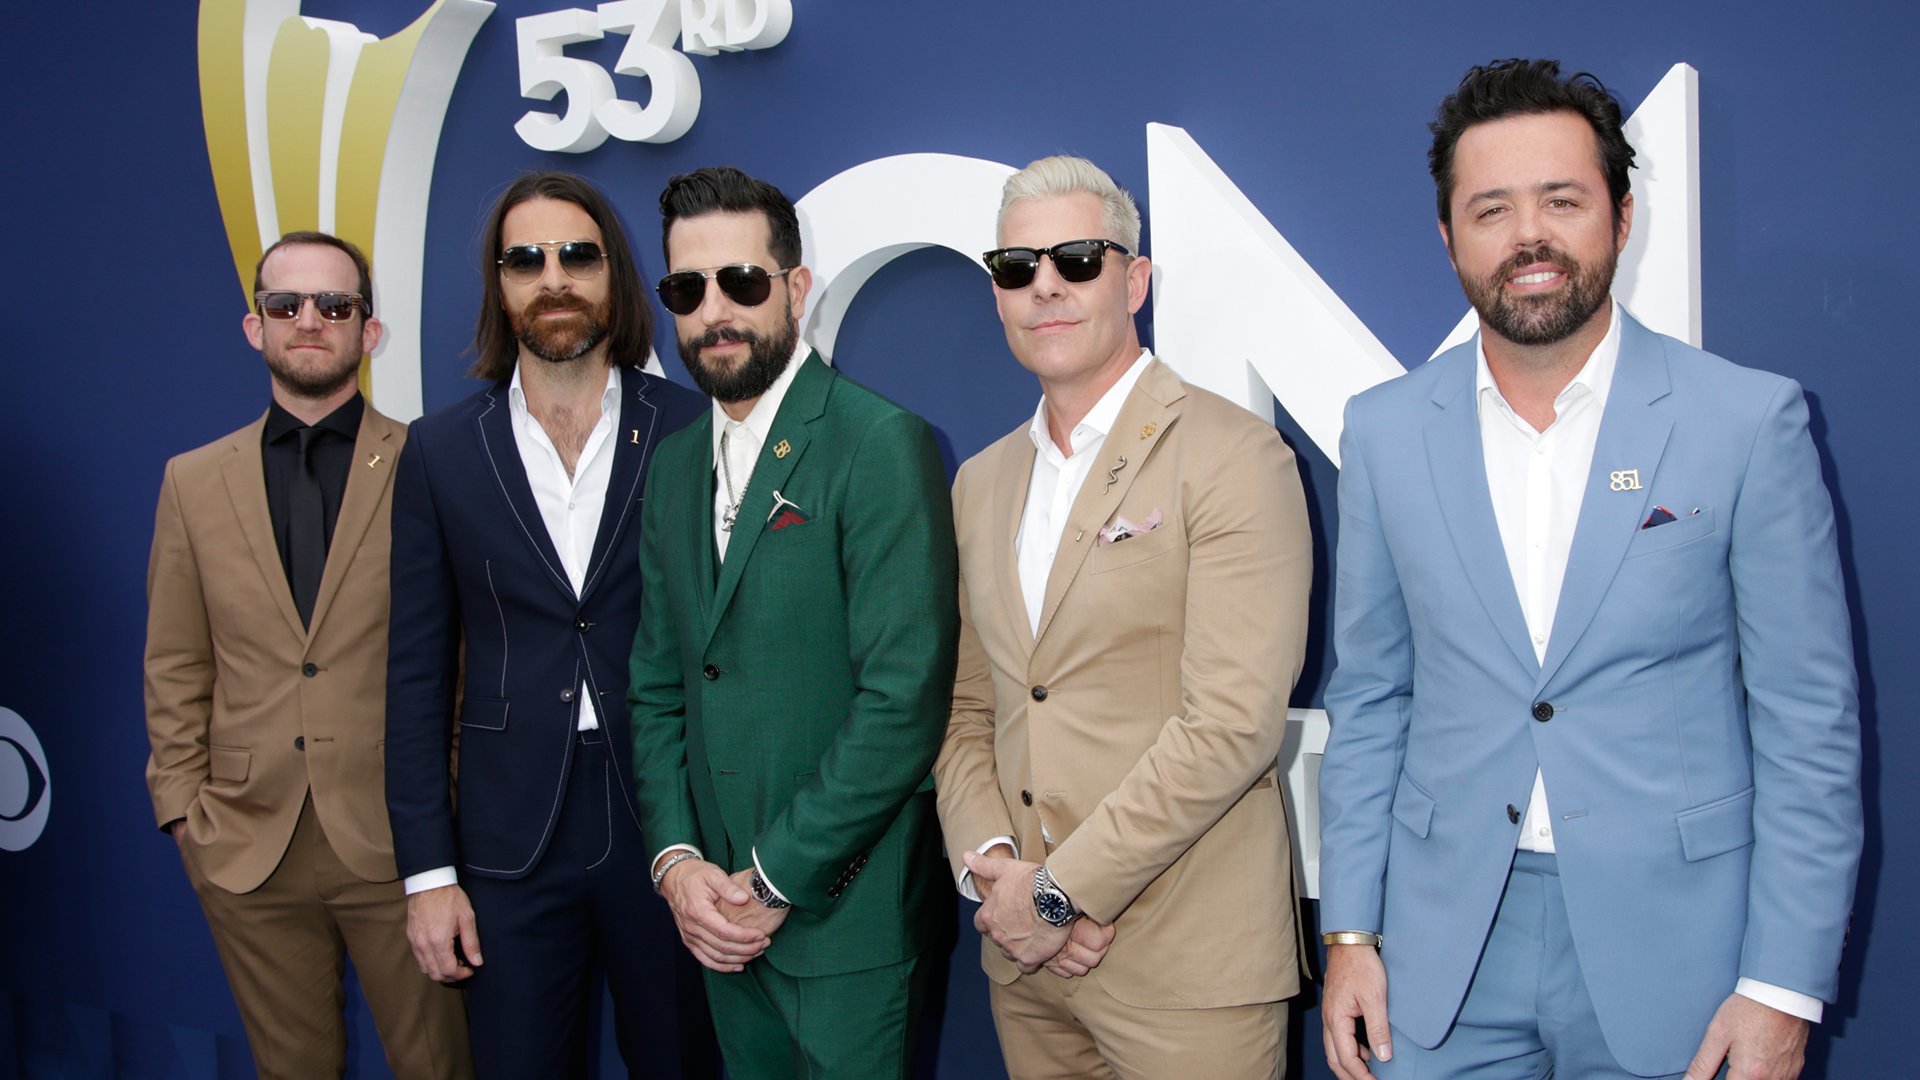 The men of Old Dominion look like a country-tinged color wheel on the ACM red carpet.